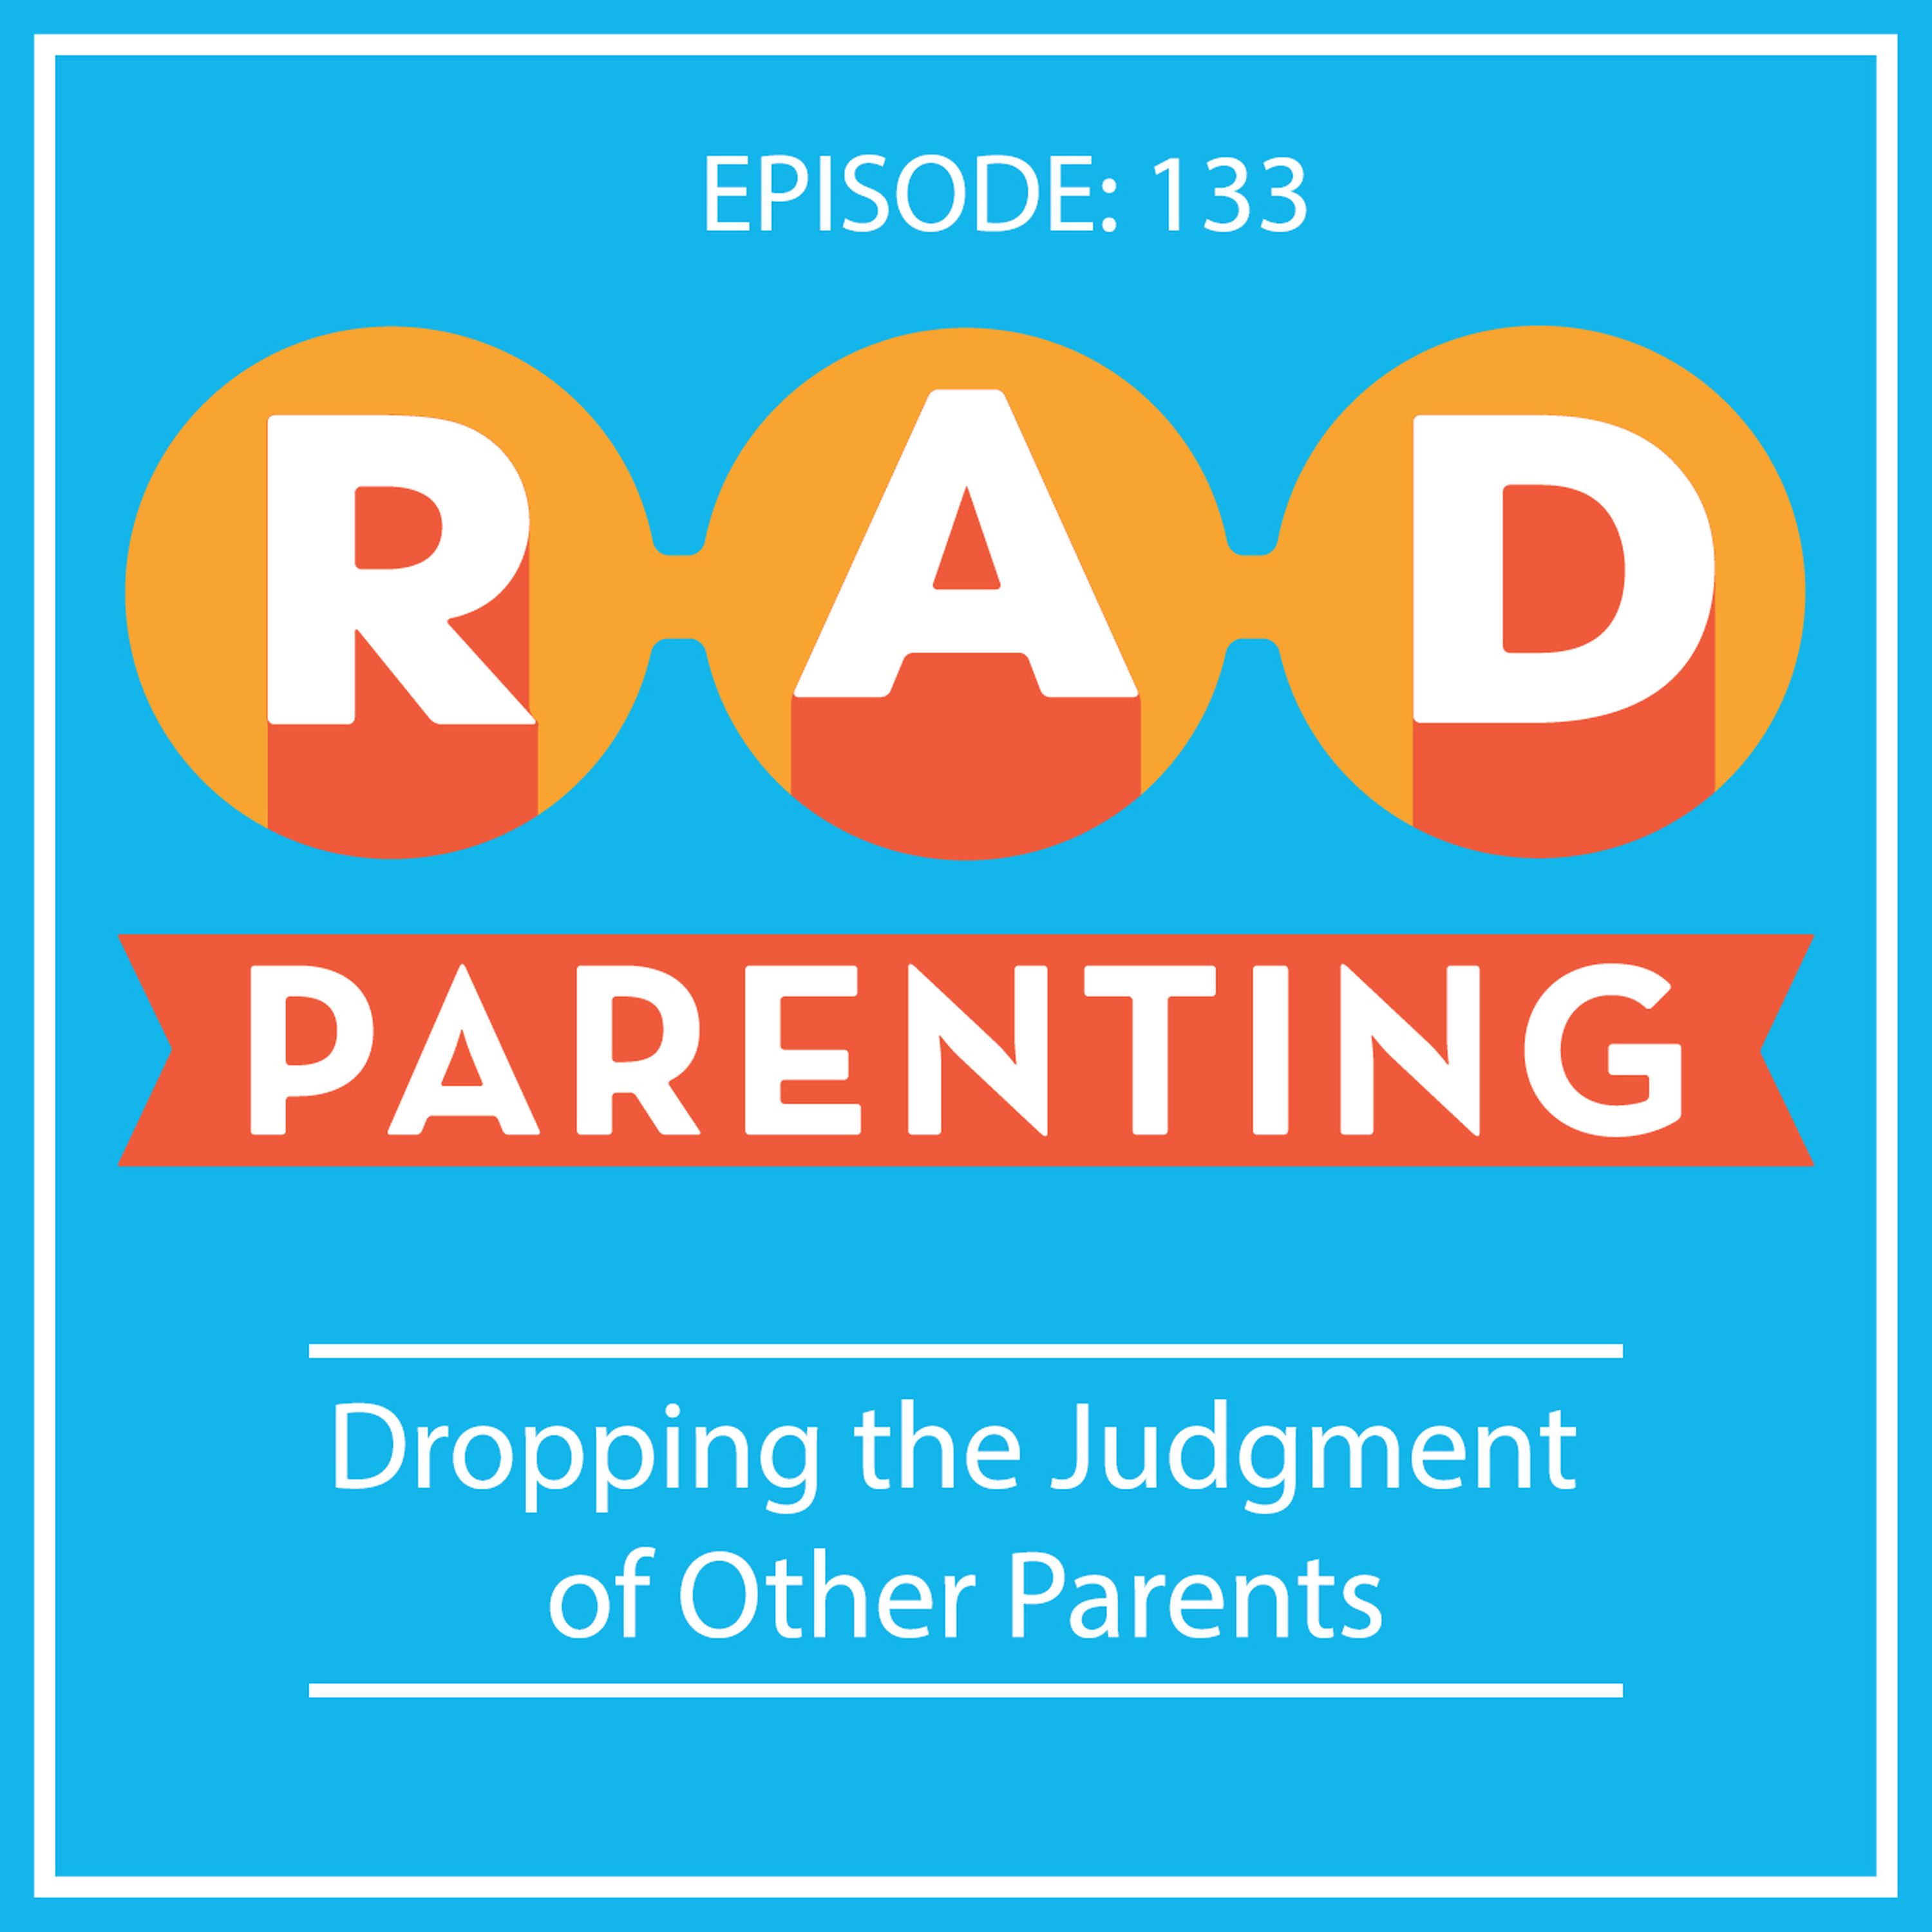 Dropping the Judgment of Other Parents